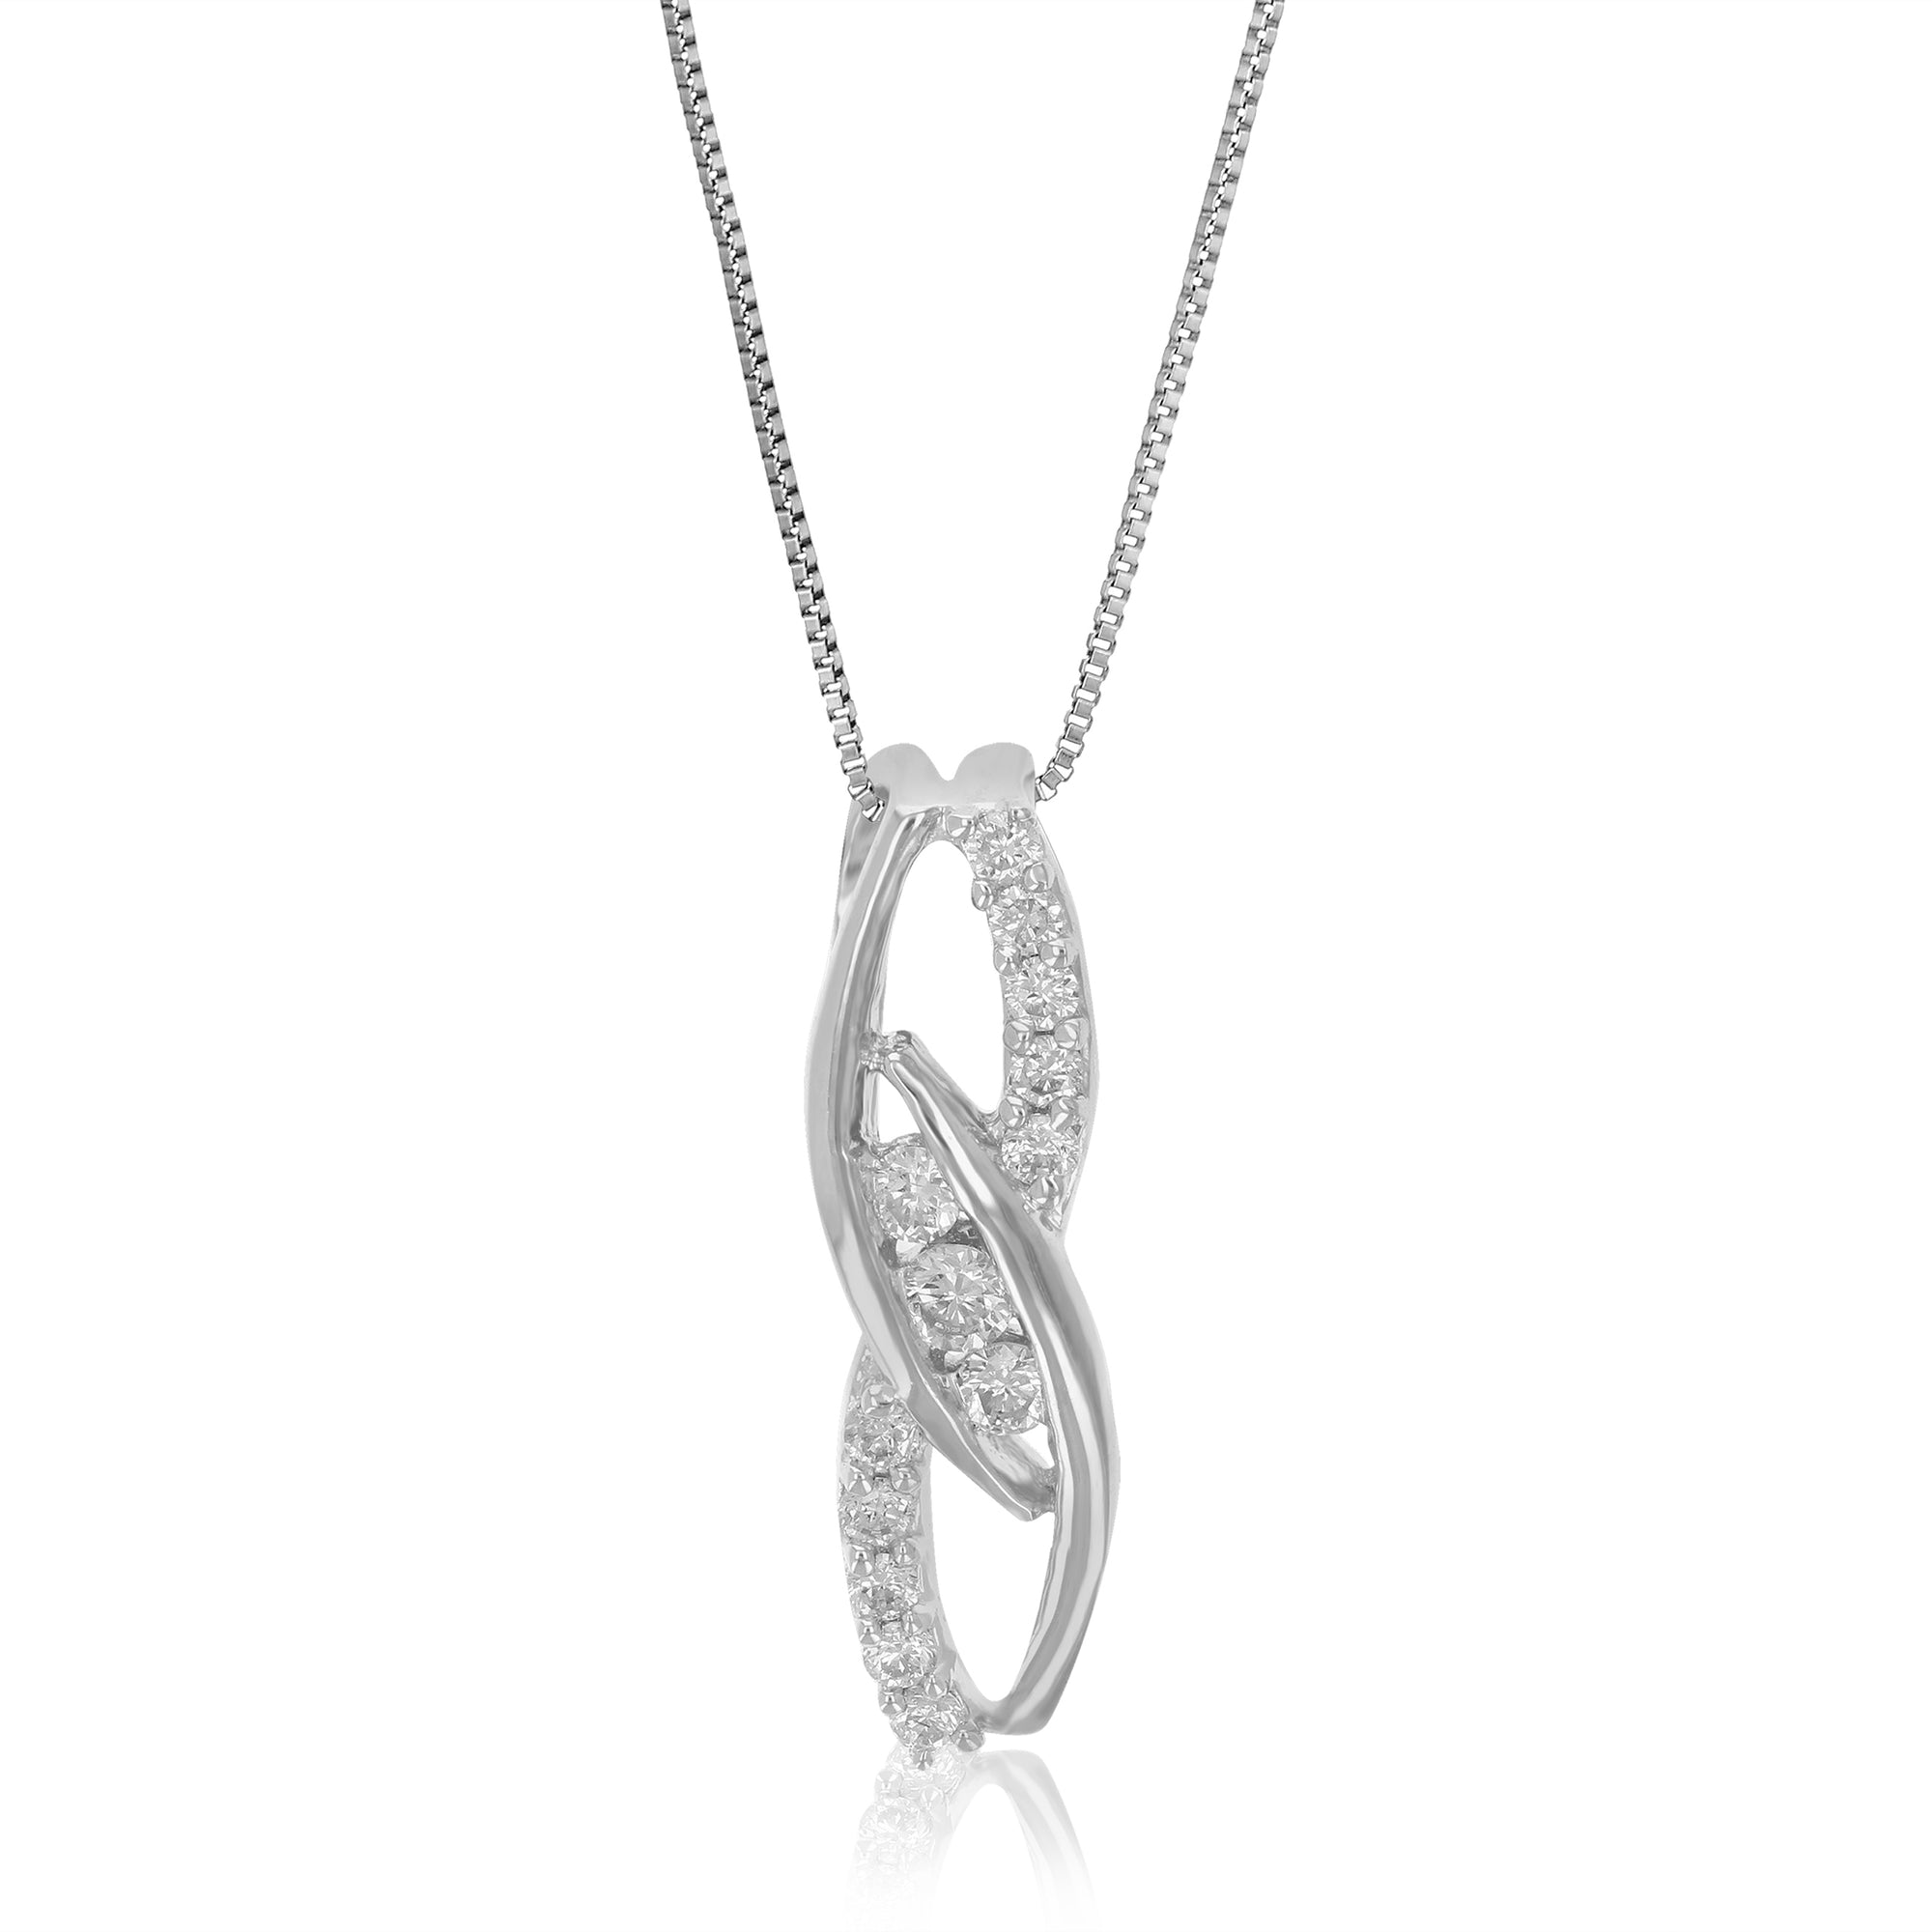 1/8 cttw Diamond Pendant Necklace for Women, Lab Grown Diamond Bypass Pendant Necklace in .925 Sterling Silver with Chain, Size 2/3 Inch